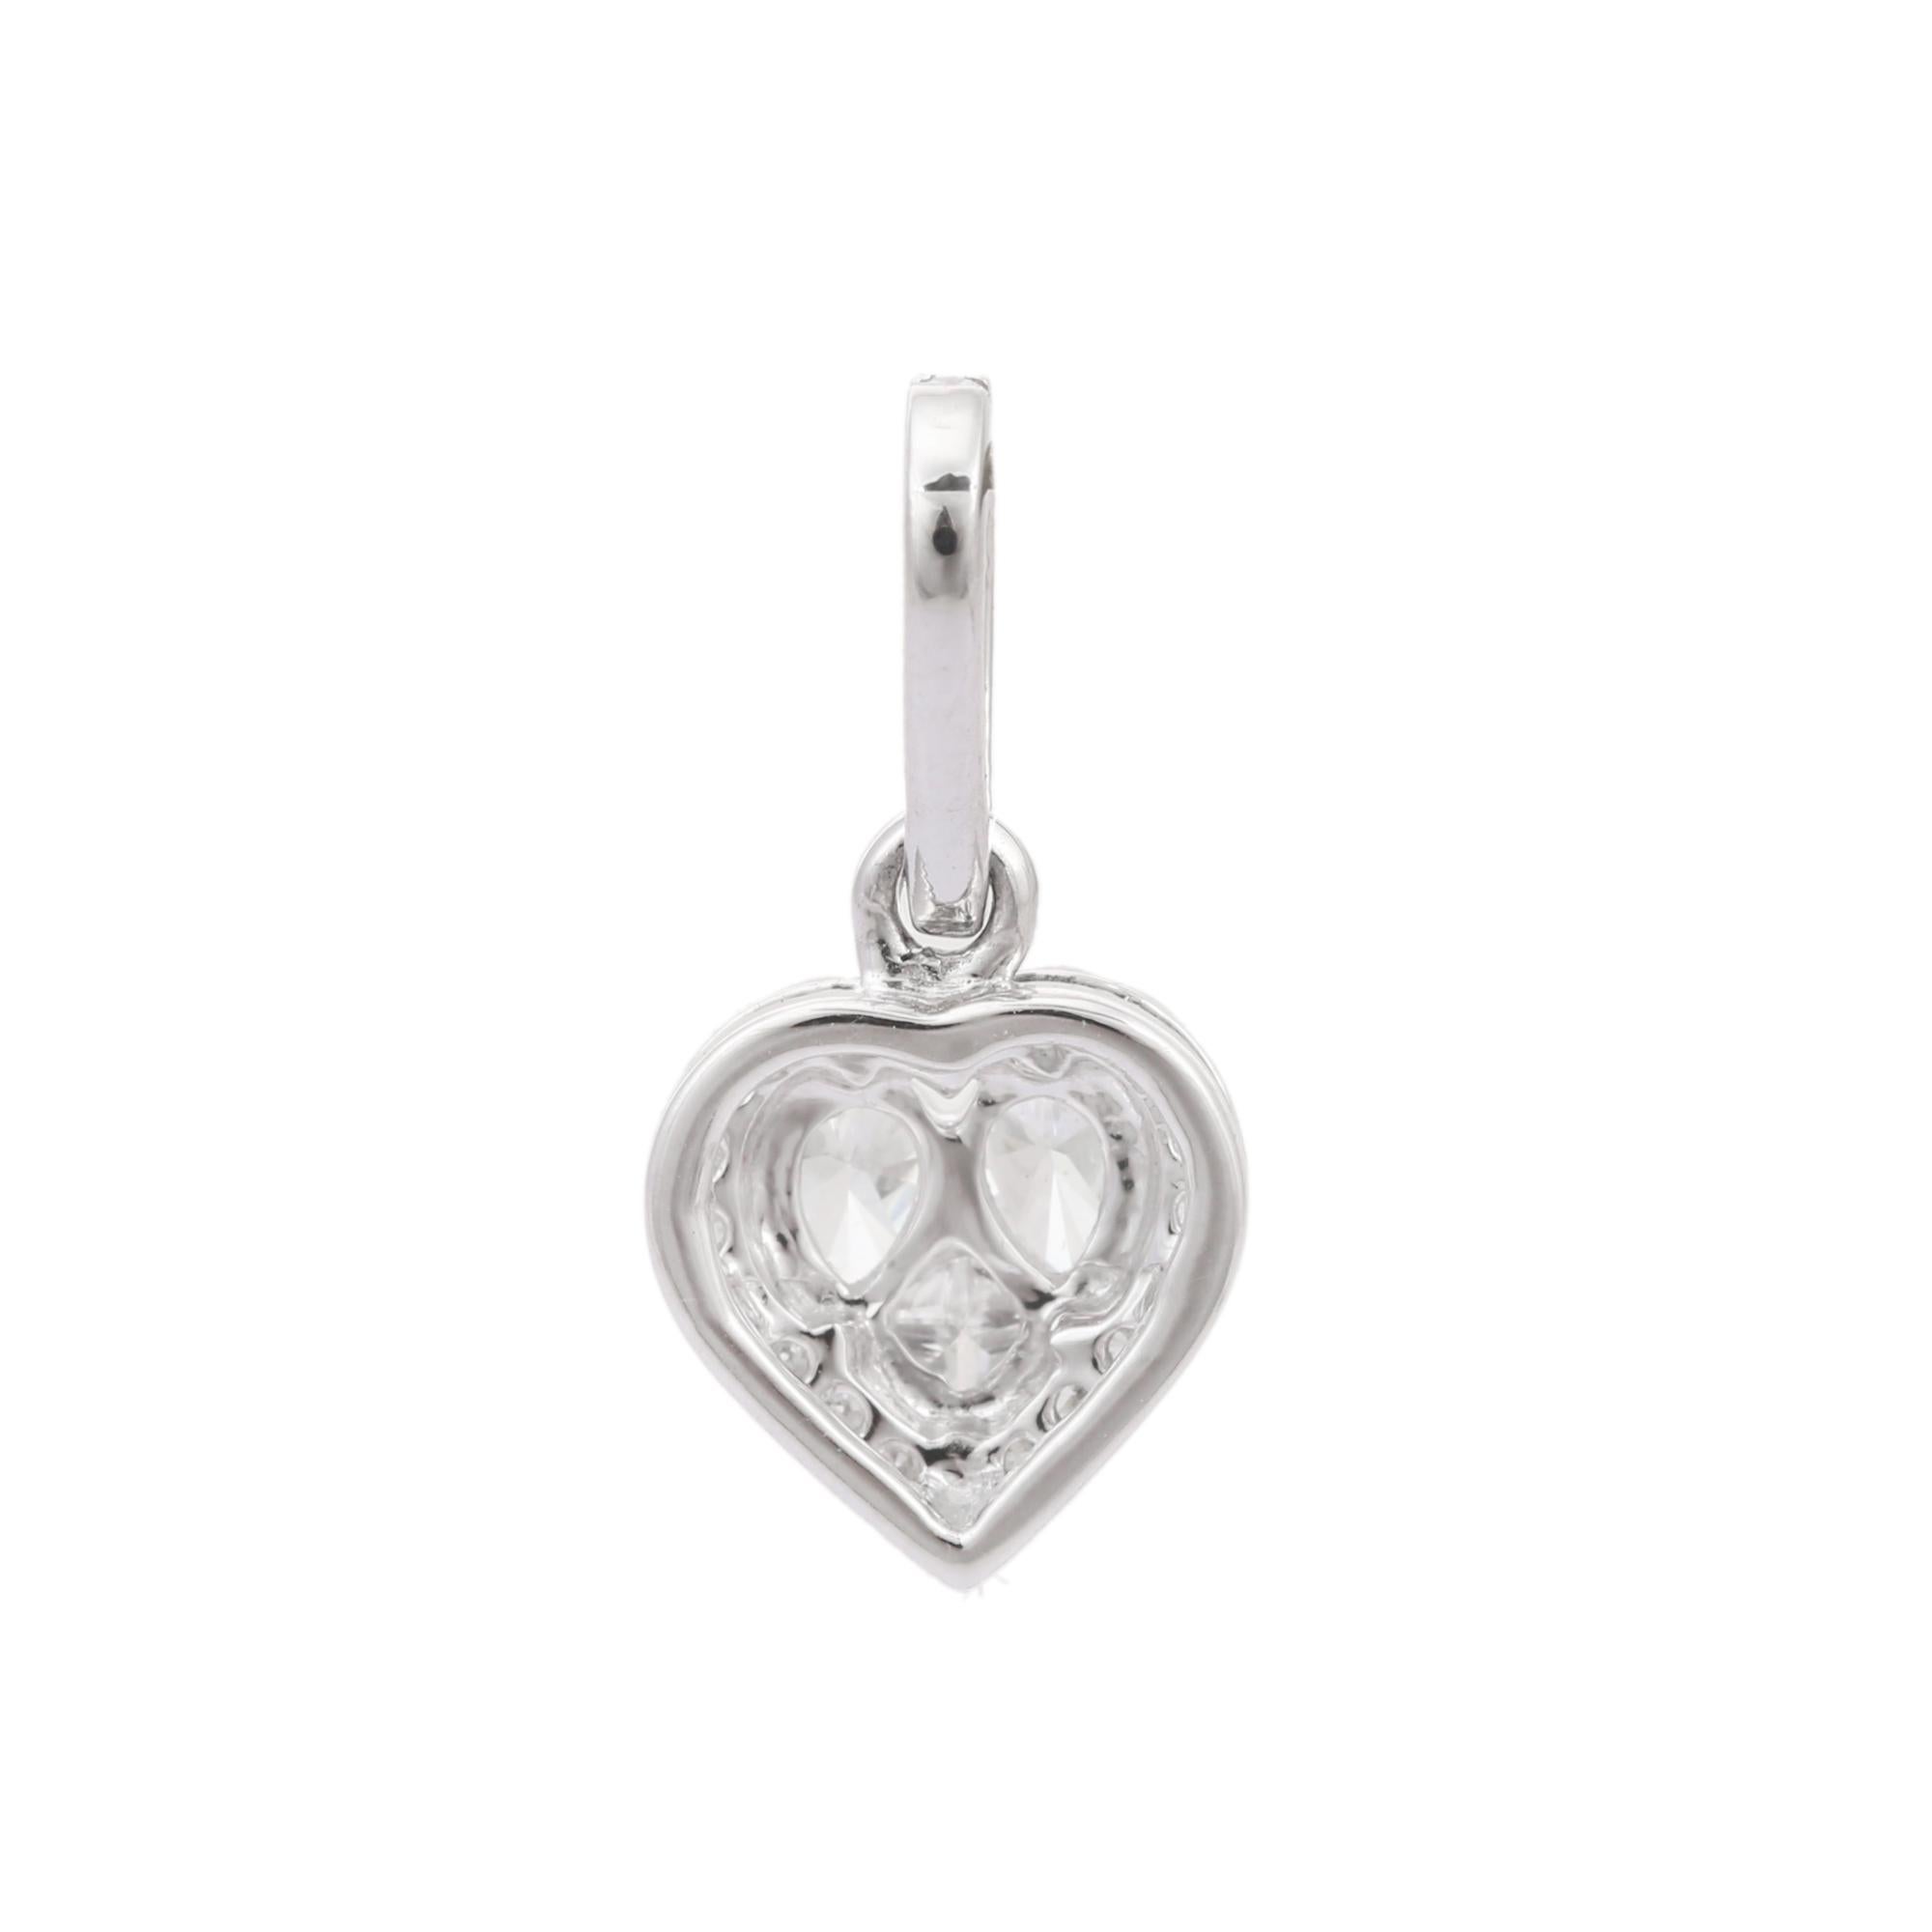 Mixed Cut 14k Solid White Gold Dainty Diamond Heart Pendant Gift For Her, Christmas Gift For Sale